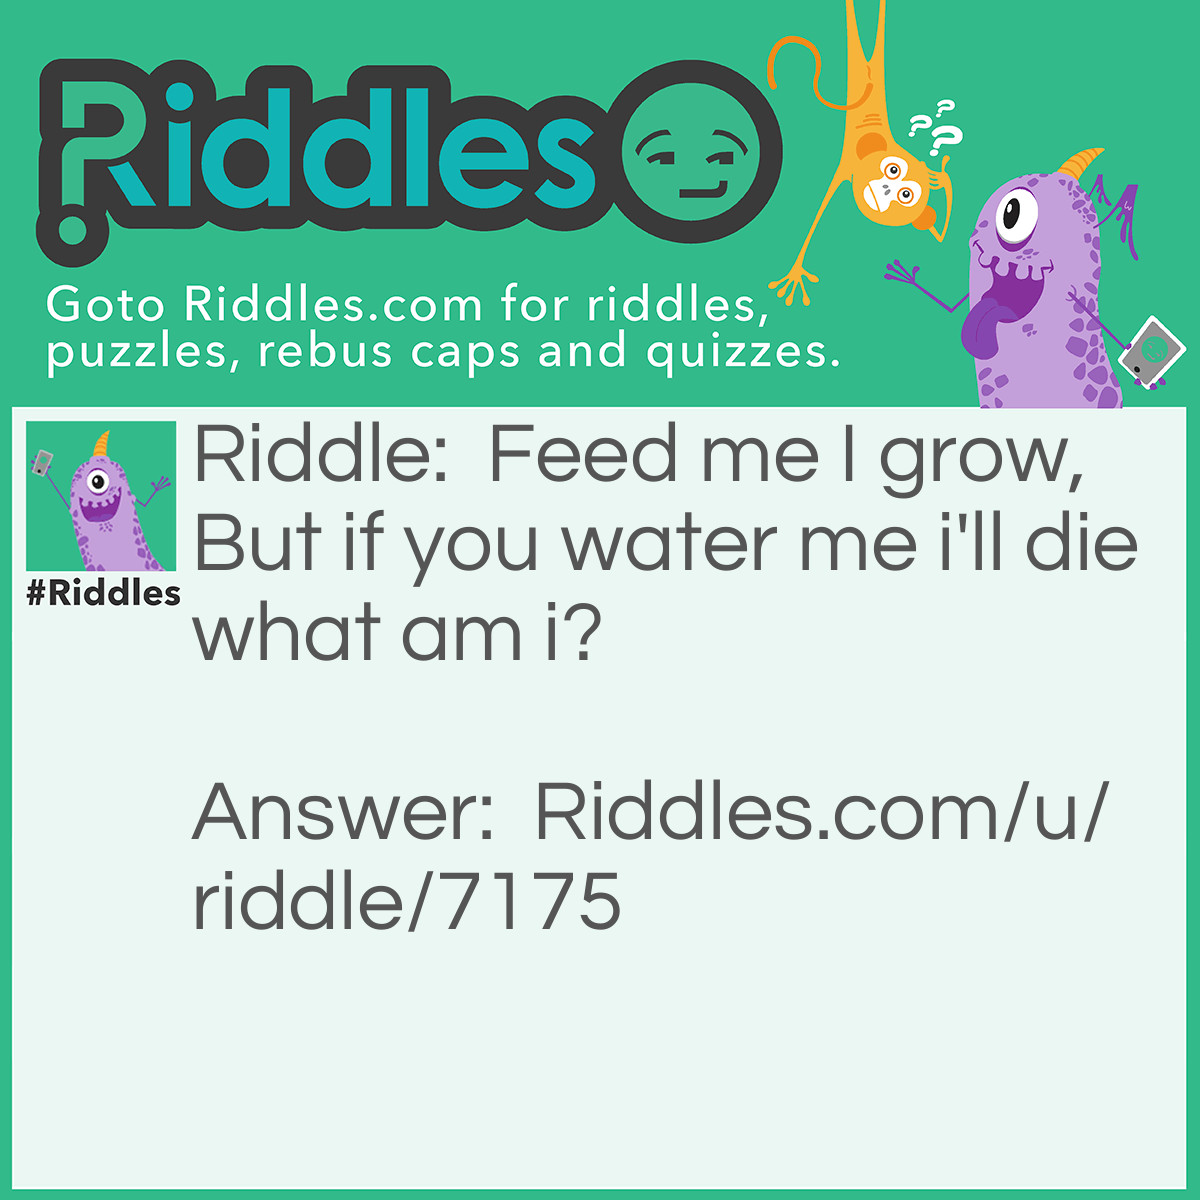 Riddle: Feed me I grow, But if you water me i'll die what am i? Answer: Fire.